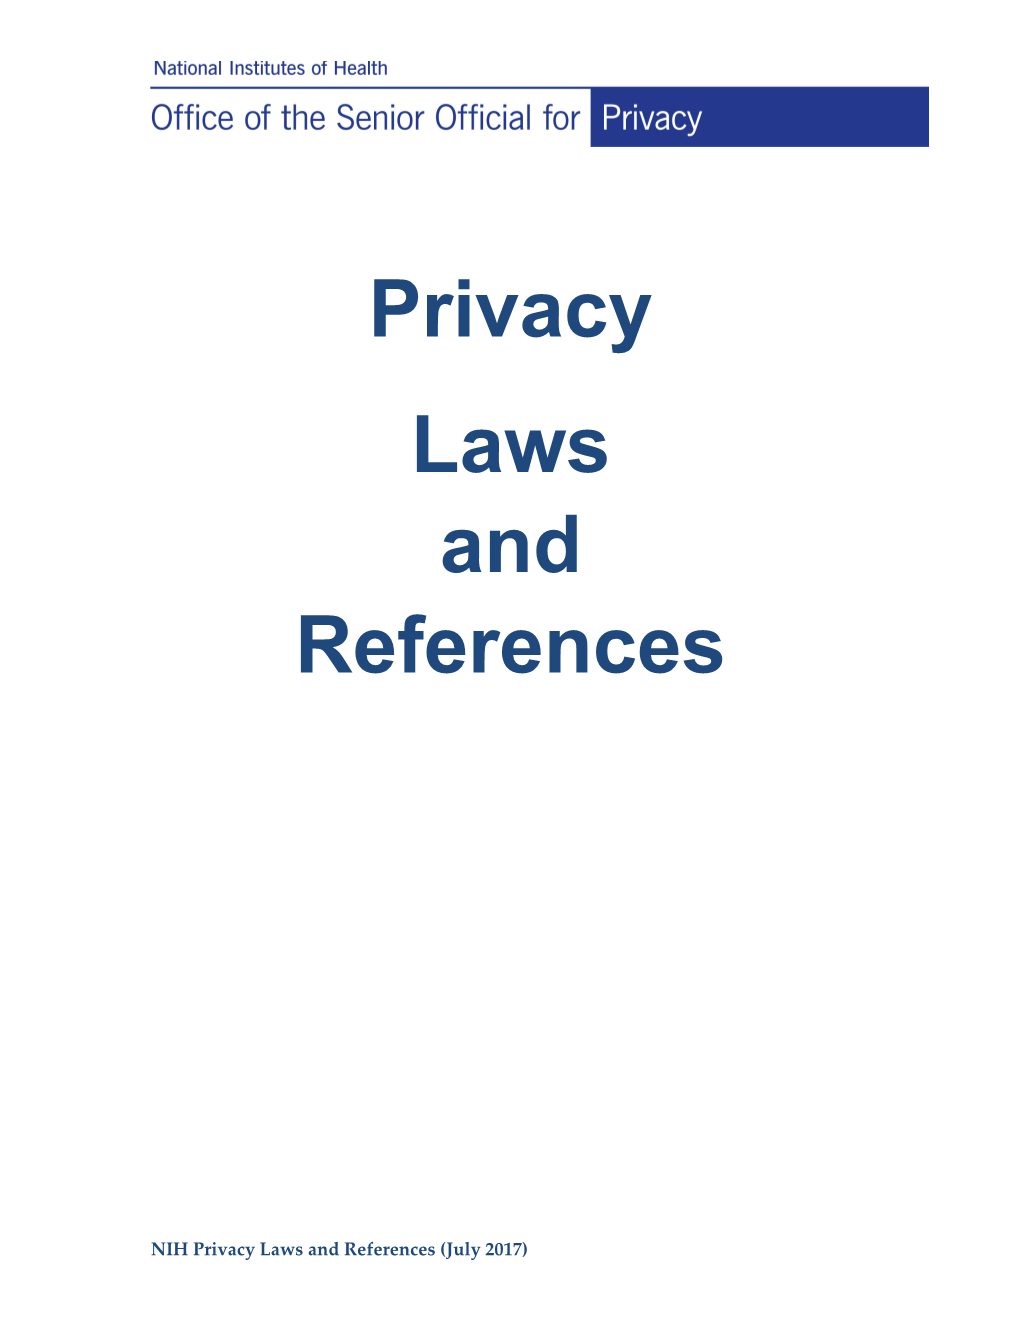 NIH Privacy Laws and References (July2017)